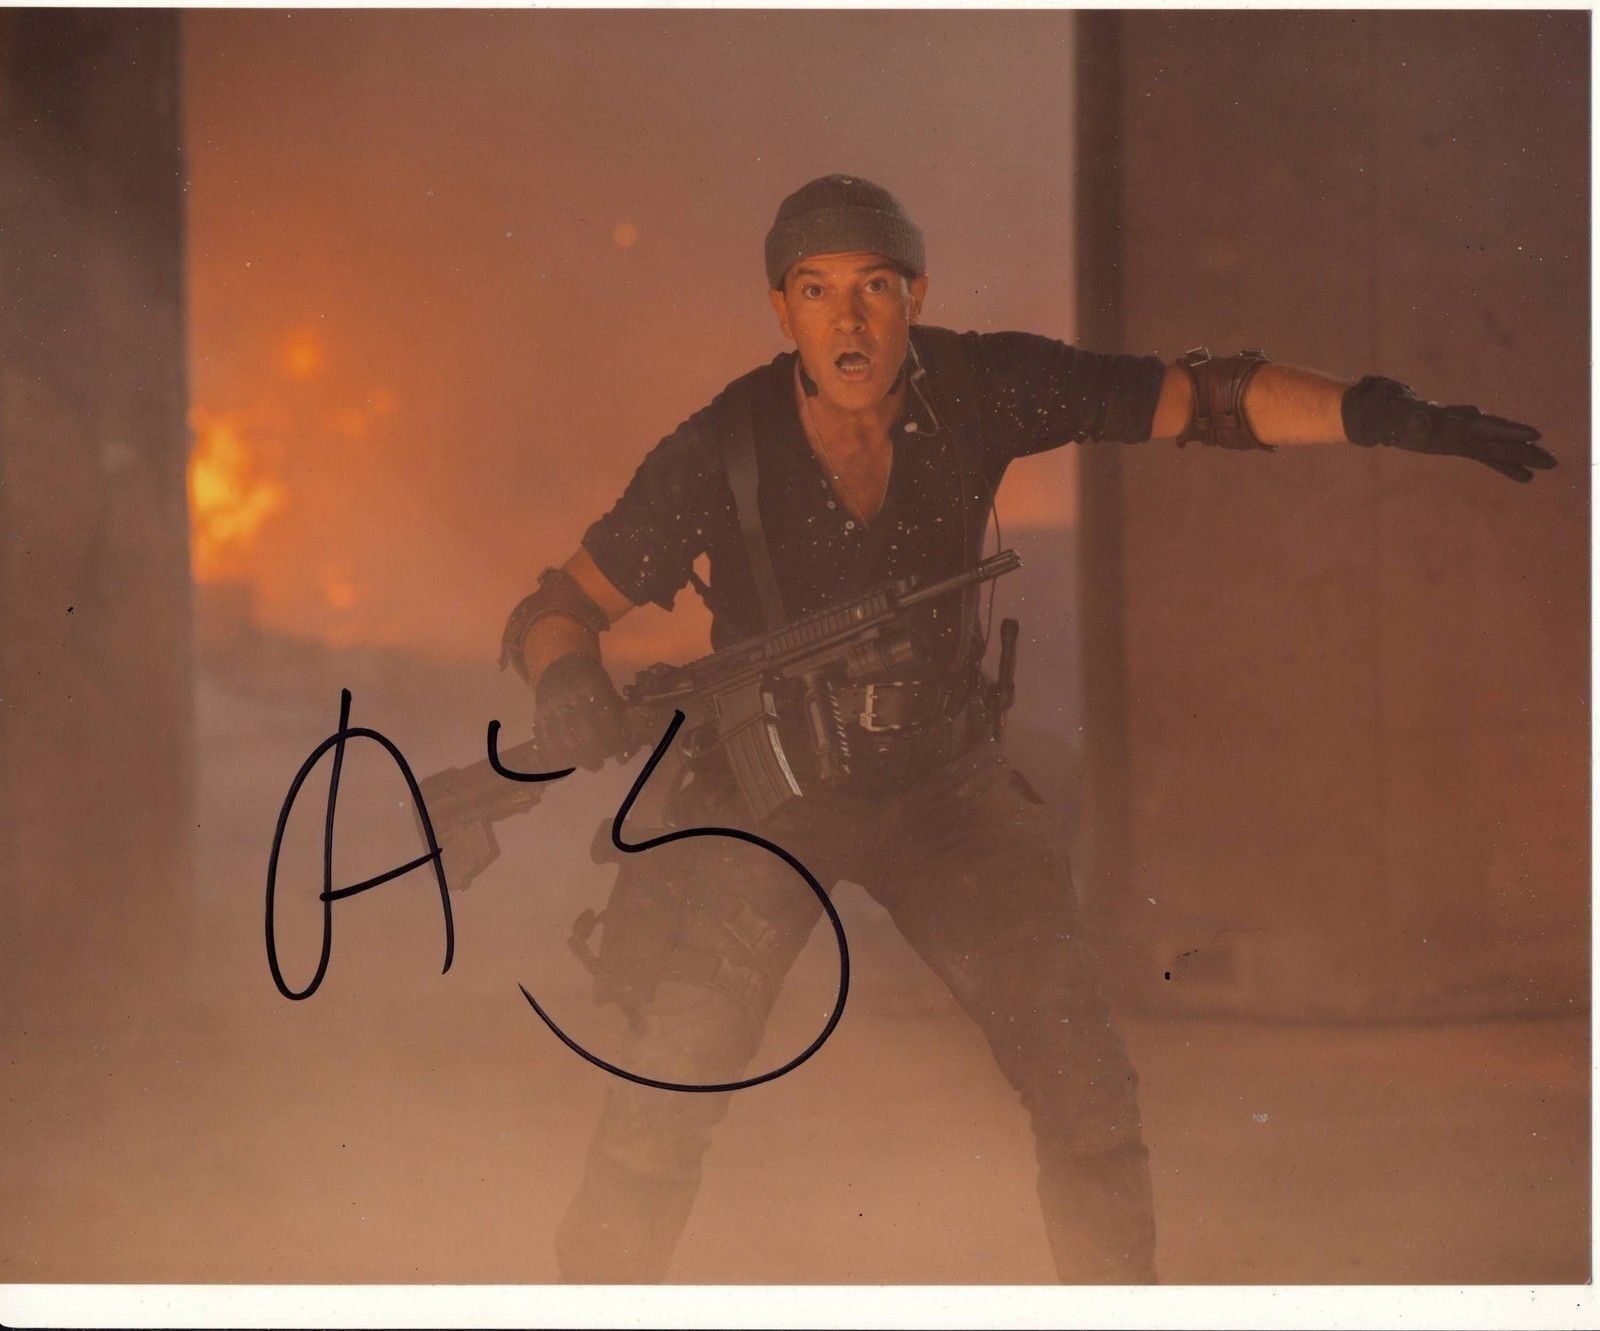 Antonio Banderas Autograph Expendables 3 Signed 8x10 Photo Poster painting AFTAL [6737]